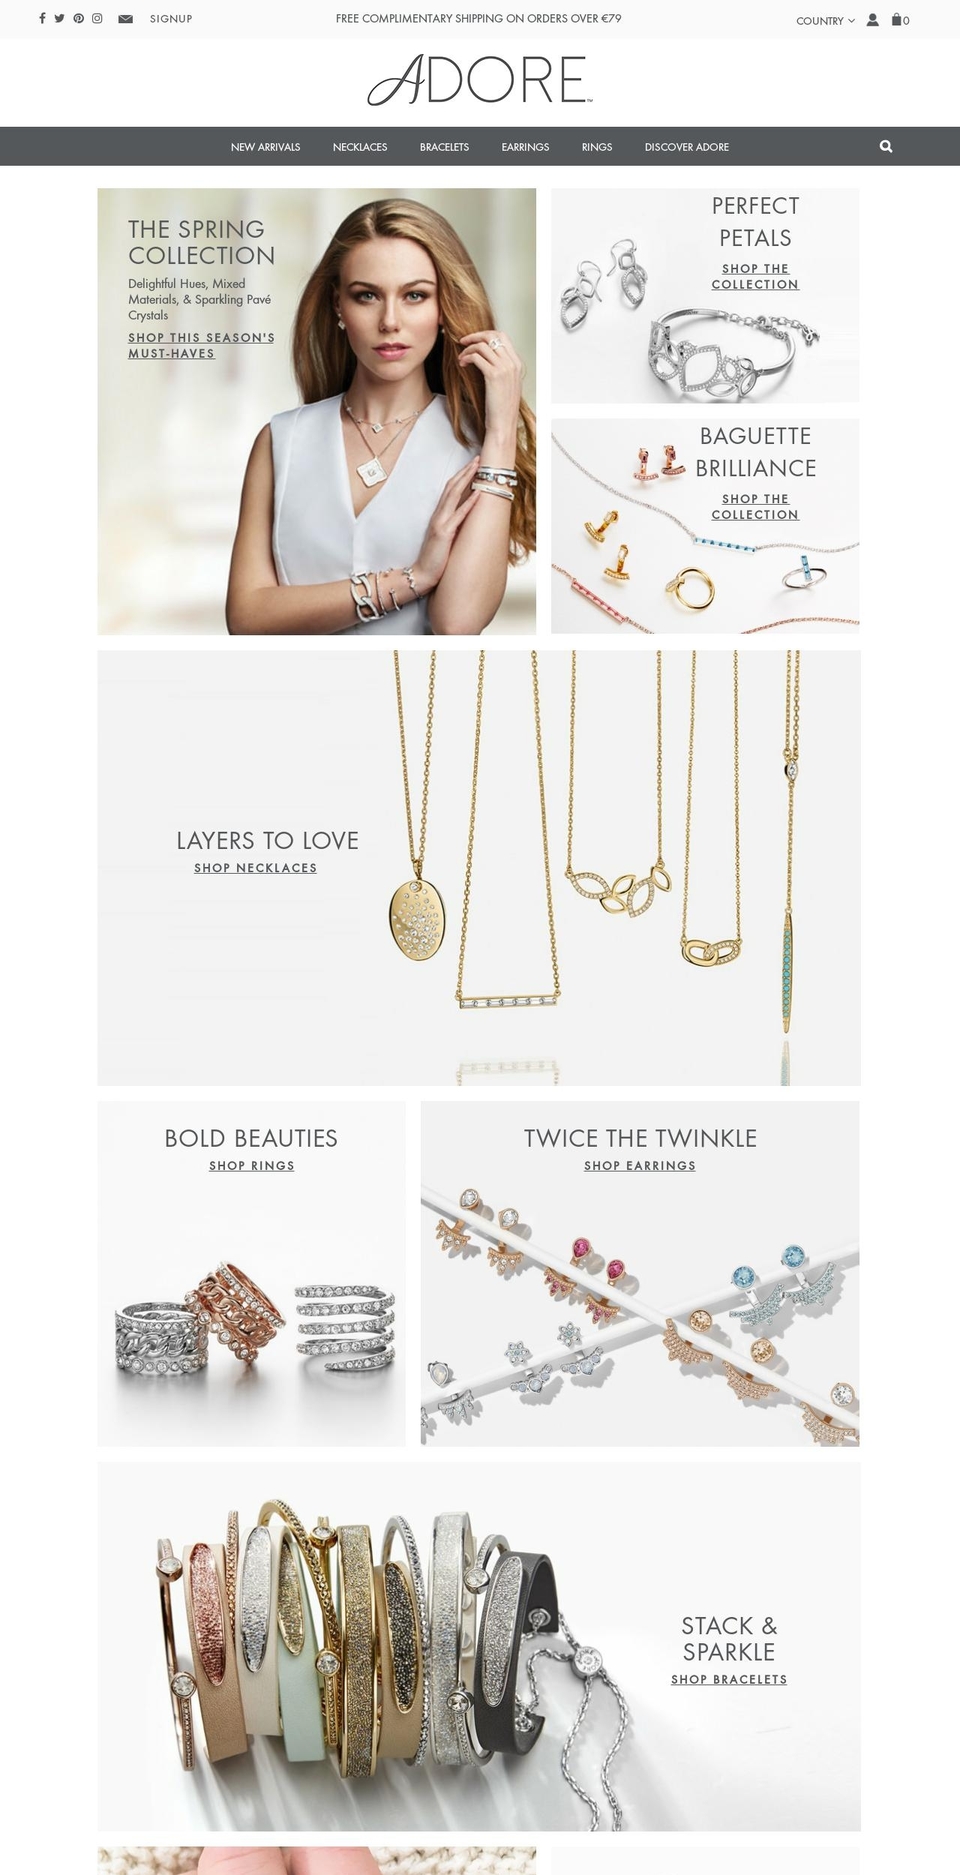 January Refresh Shopify theme site example adorejewellery.com